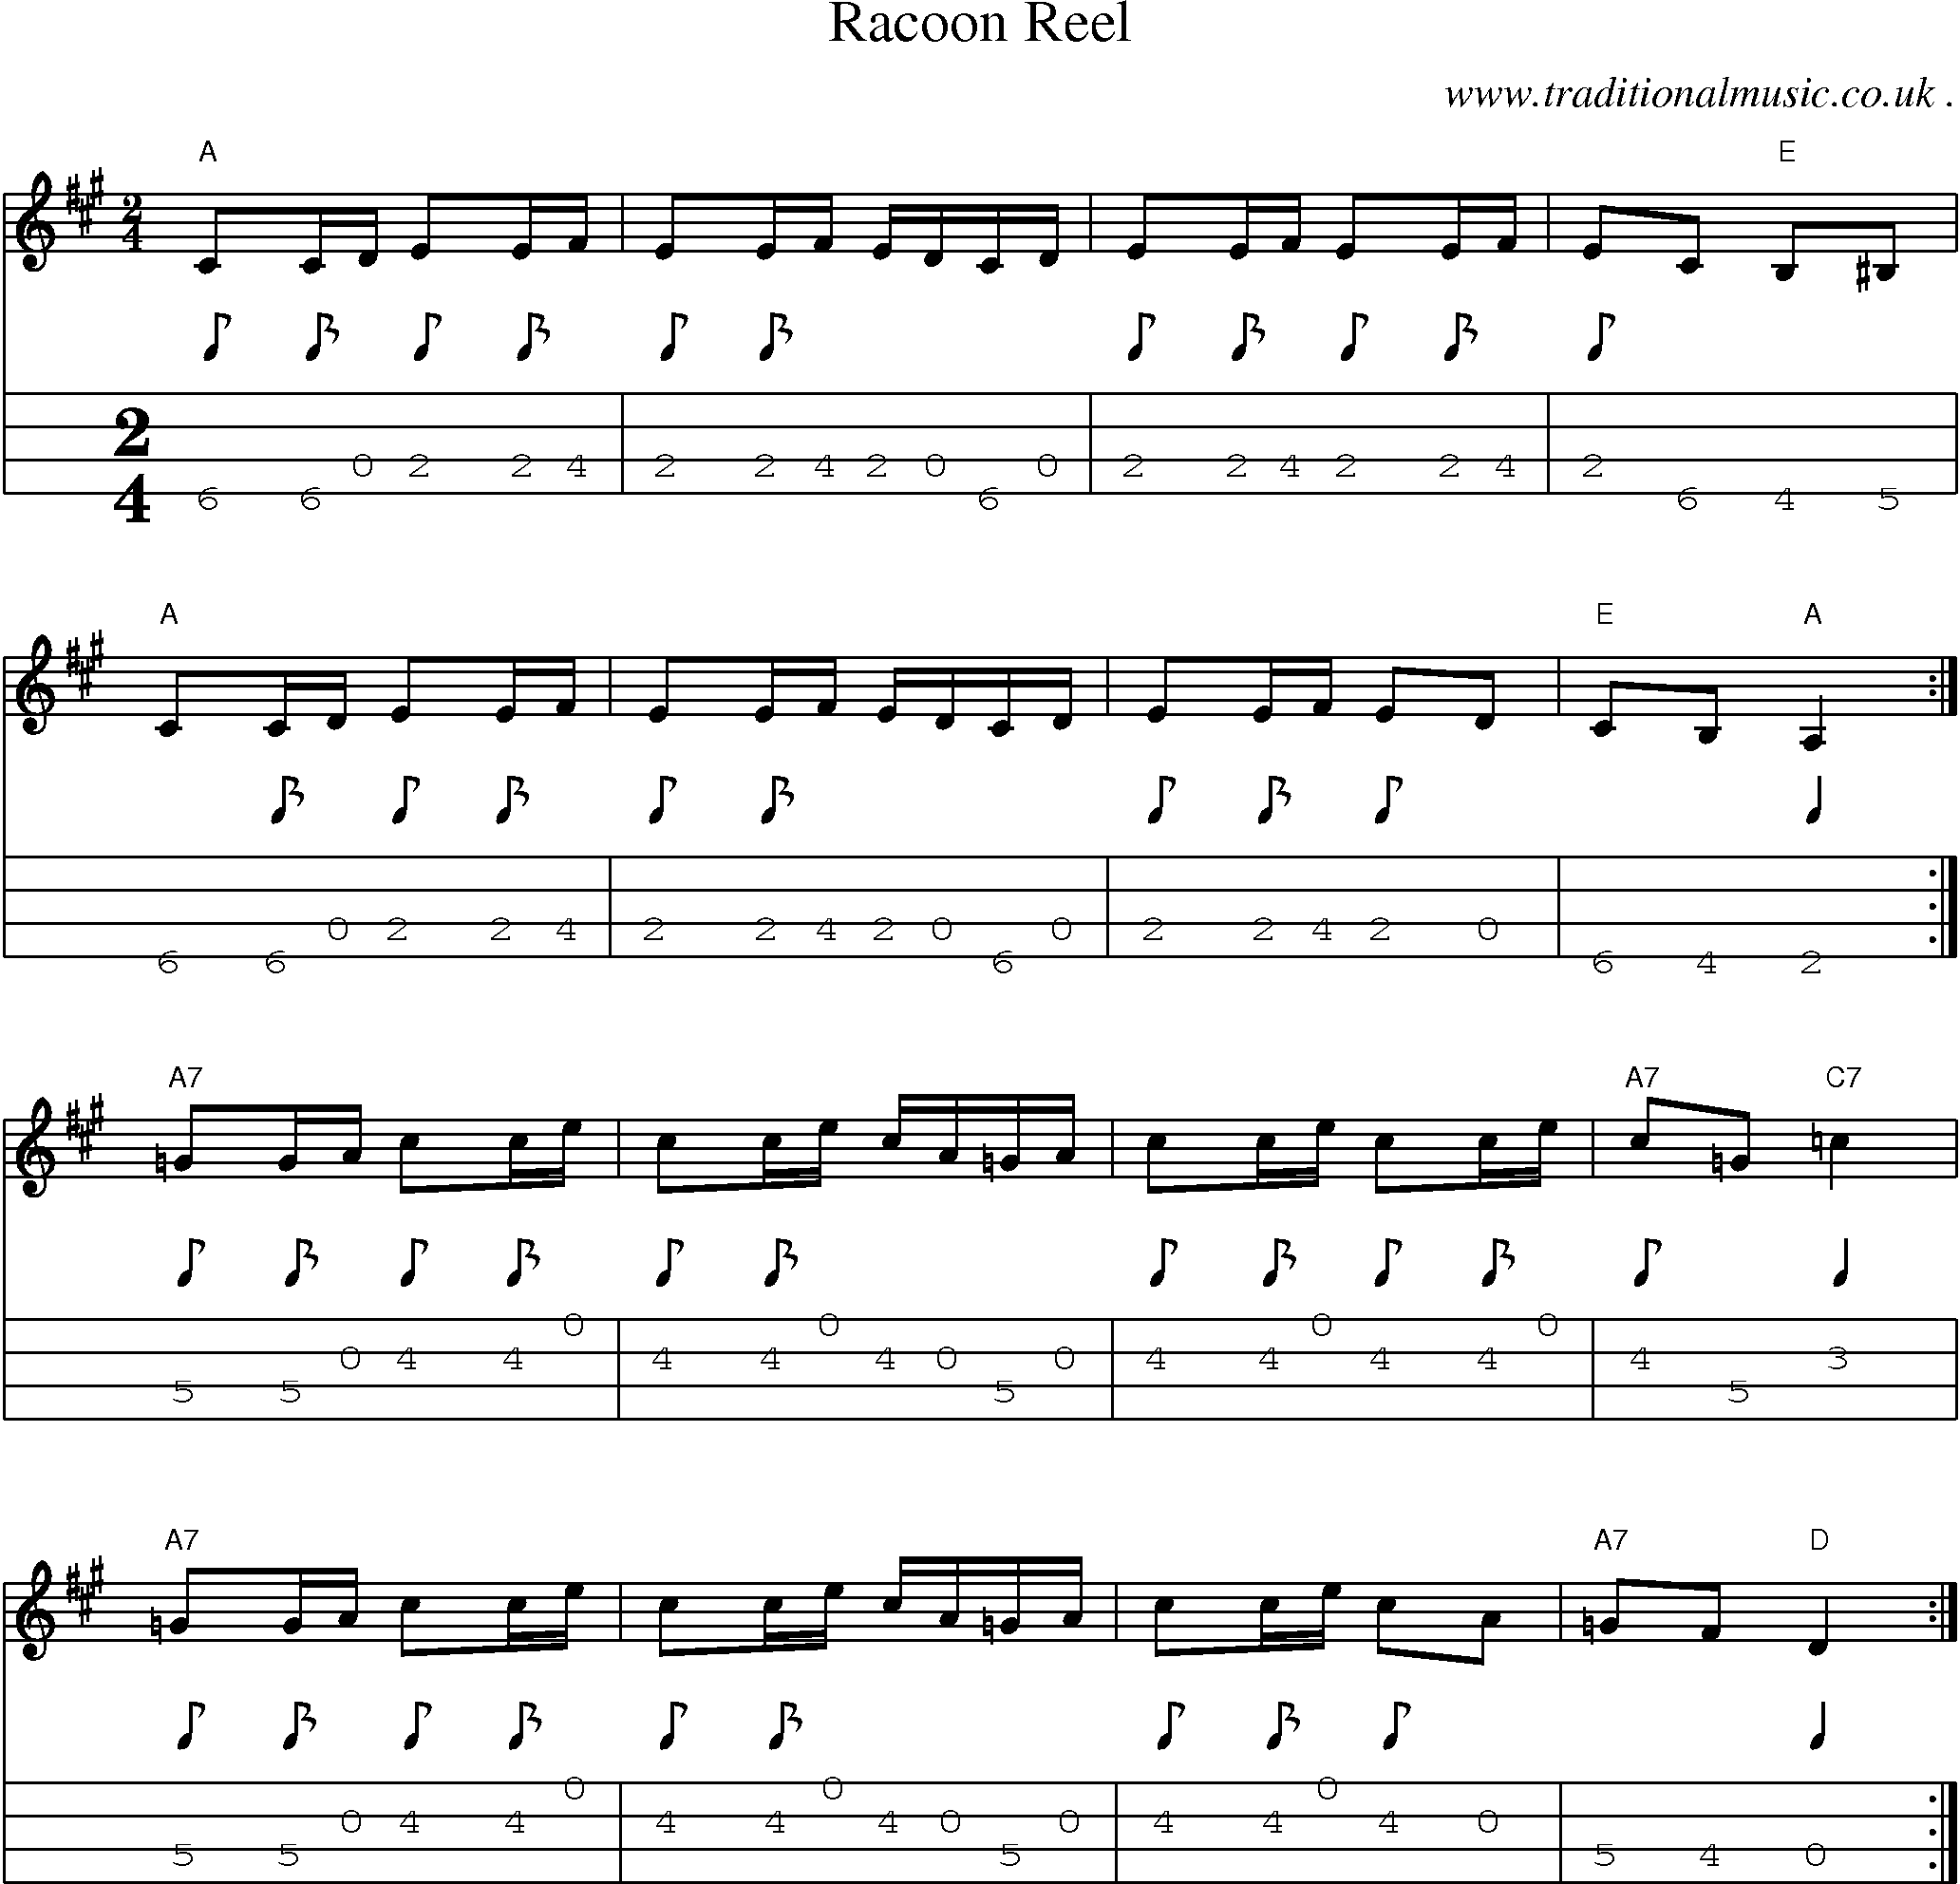 Music Score and Mandolin Tabs for Racoon Reel